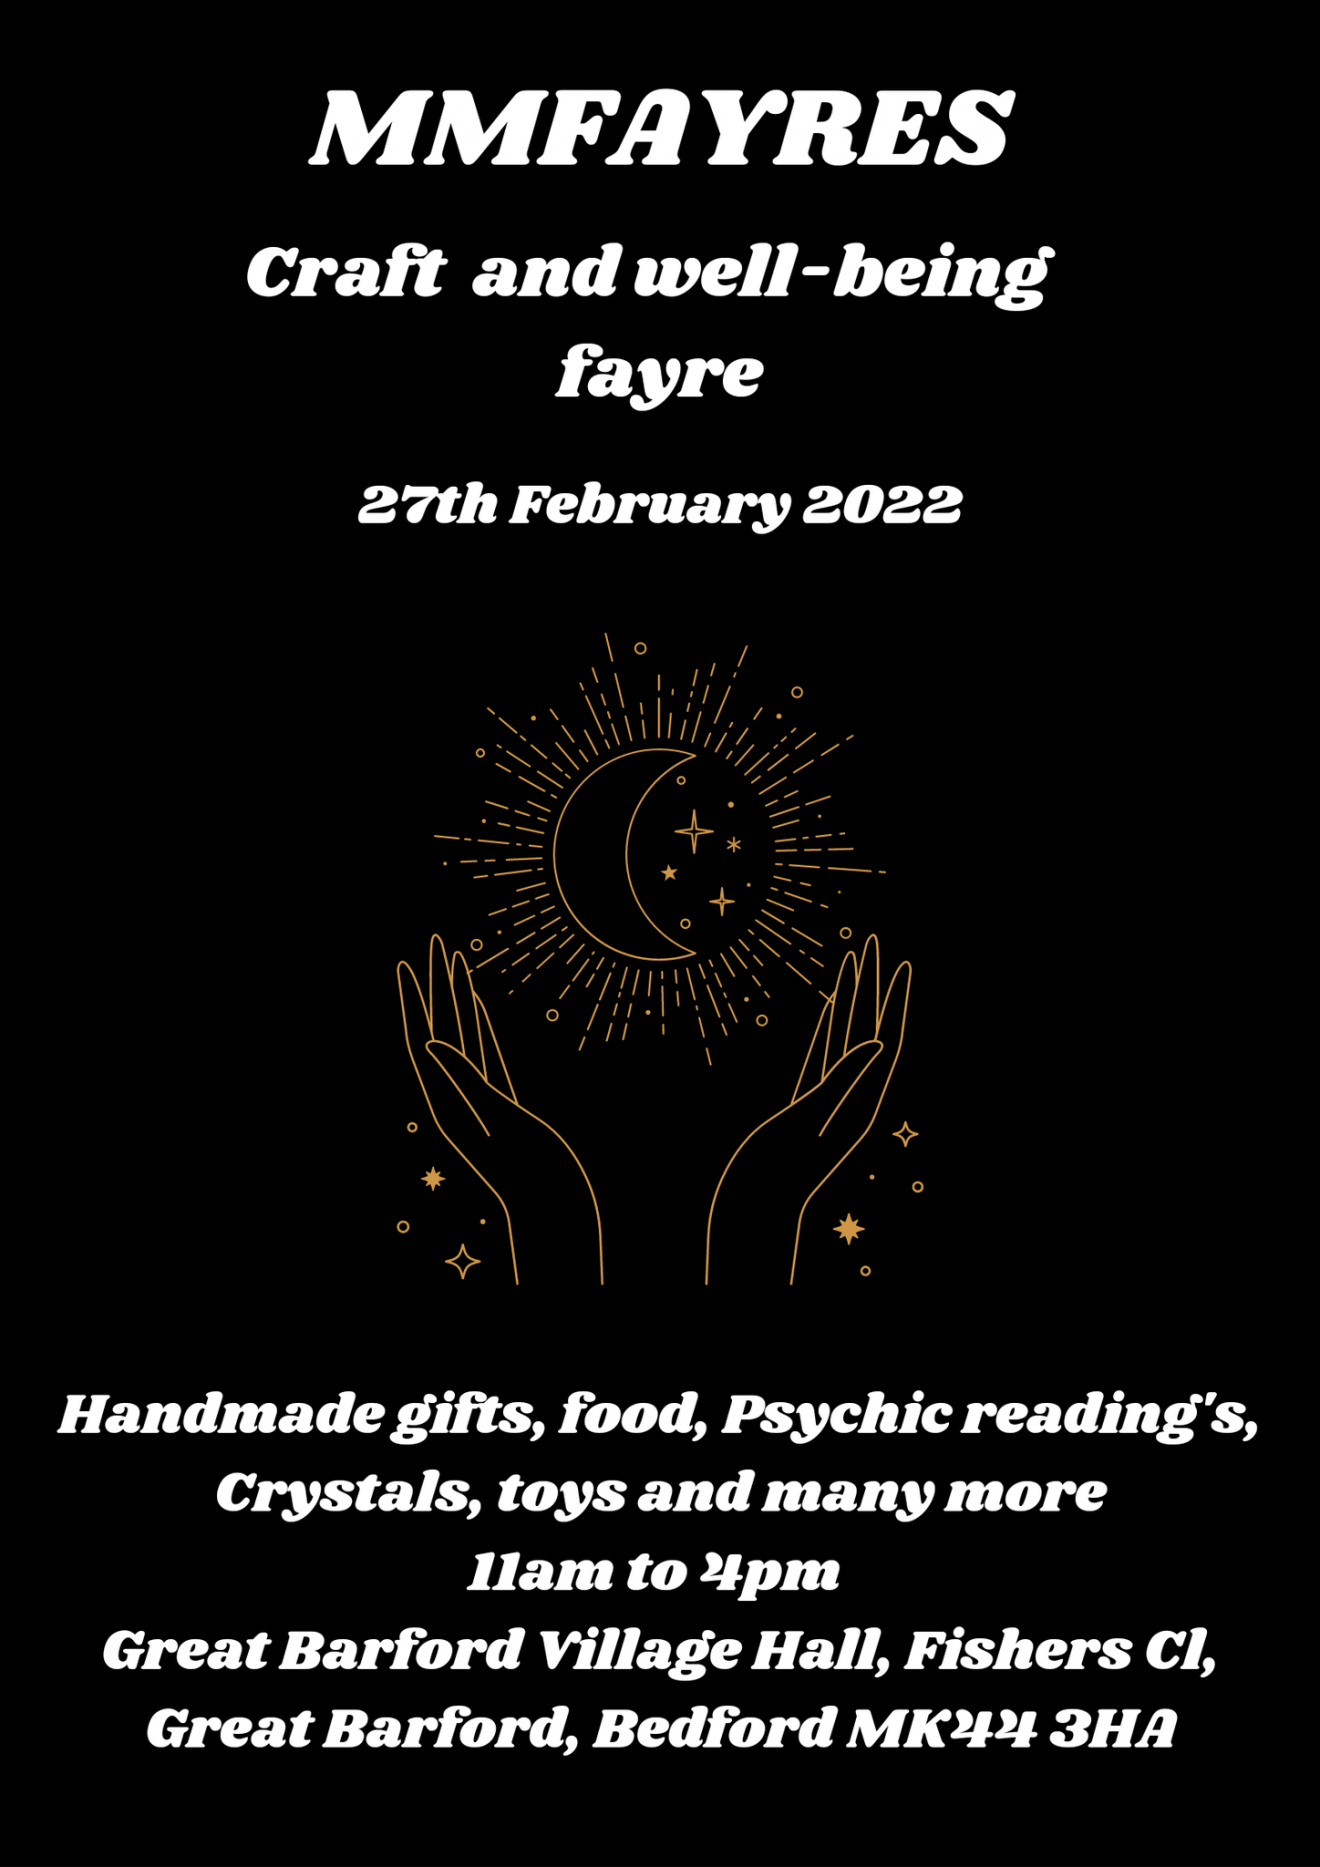 Craft and Well-Being Fayre - February 27th, 2022